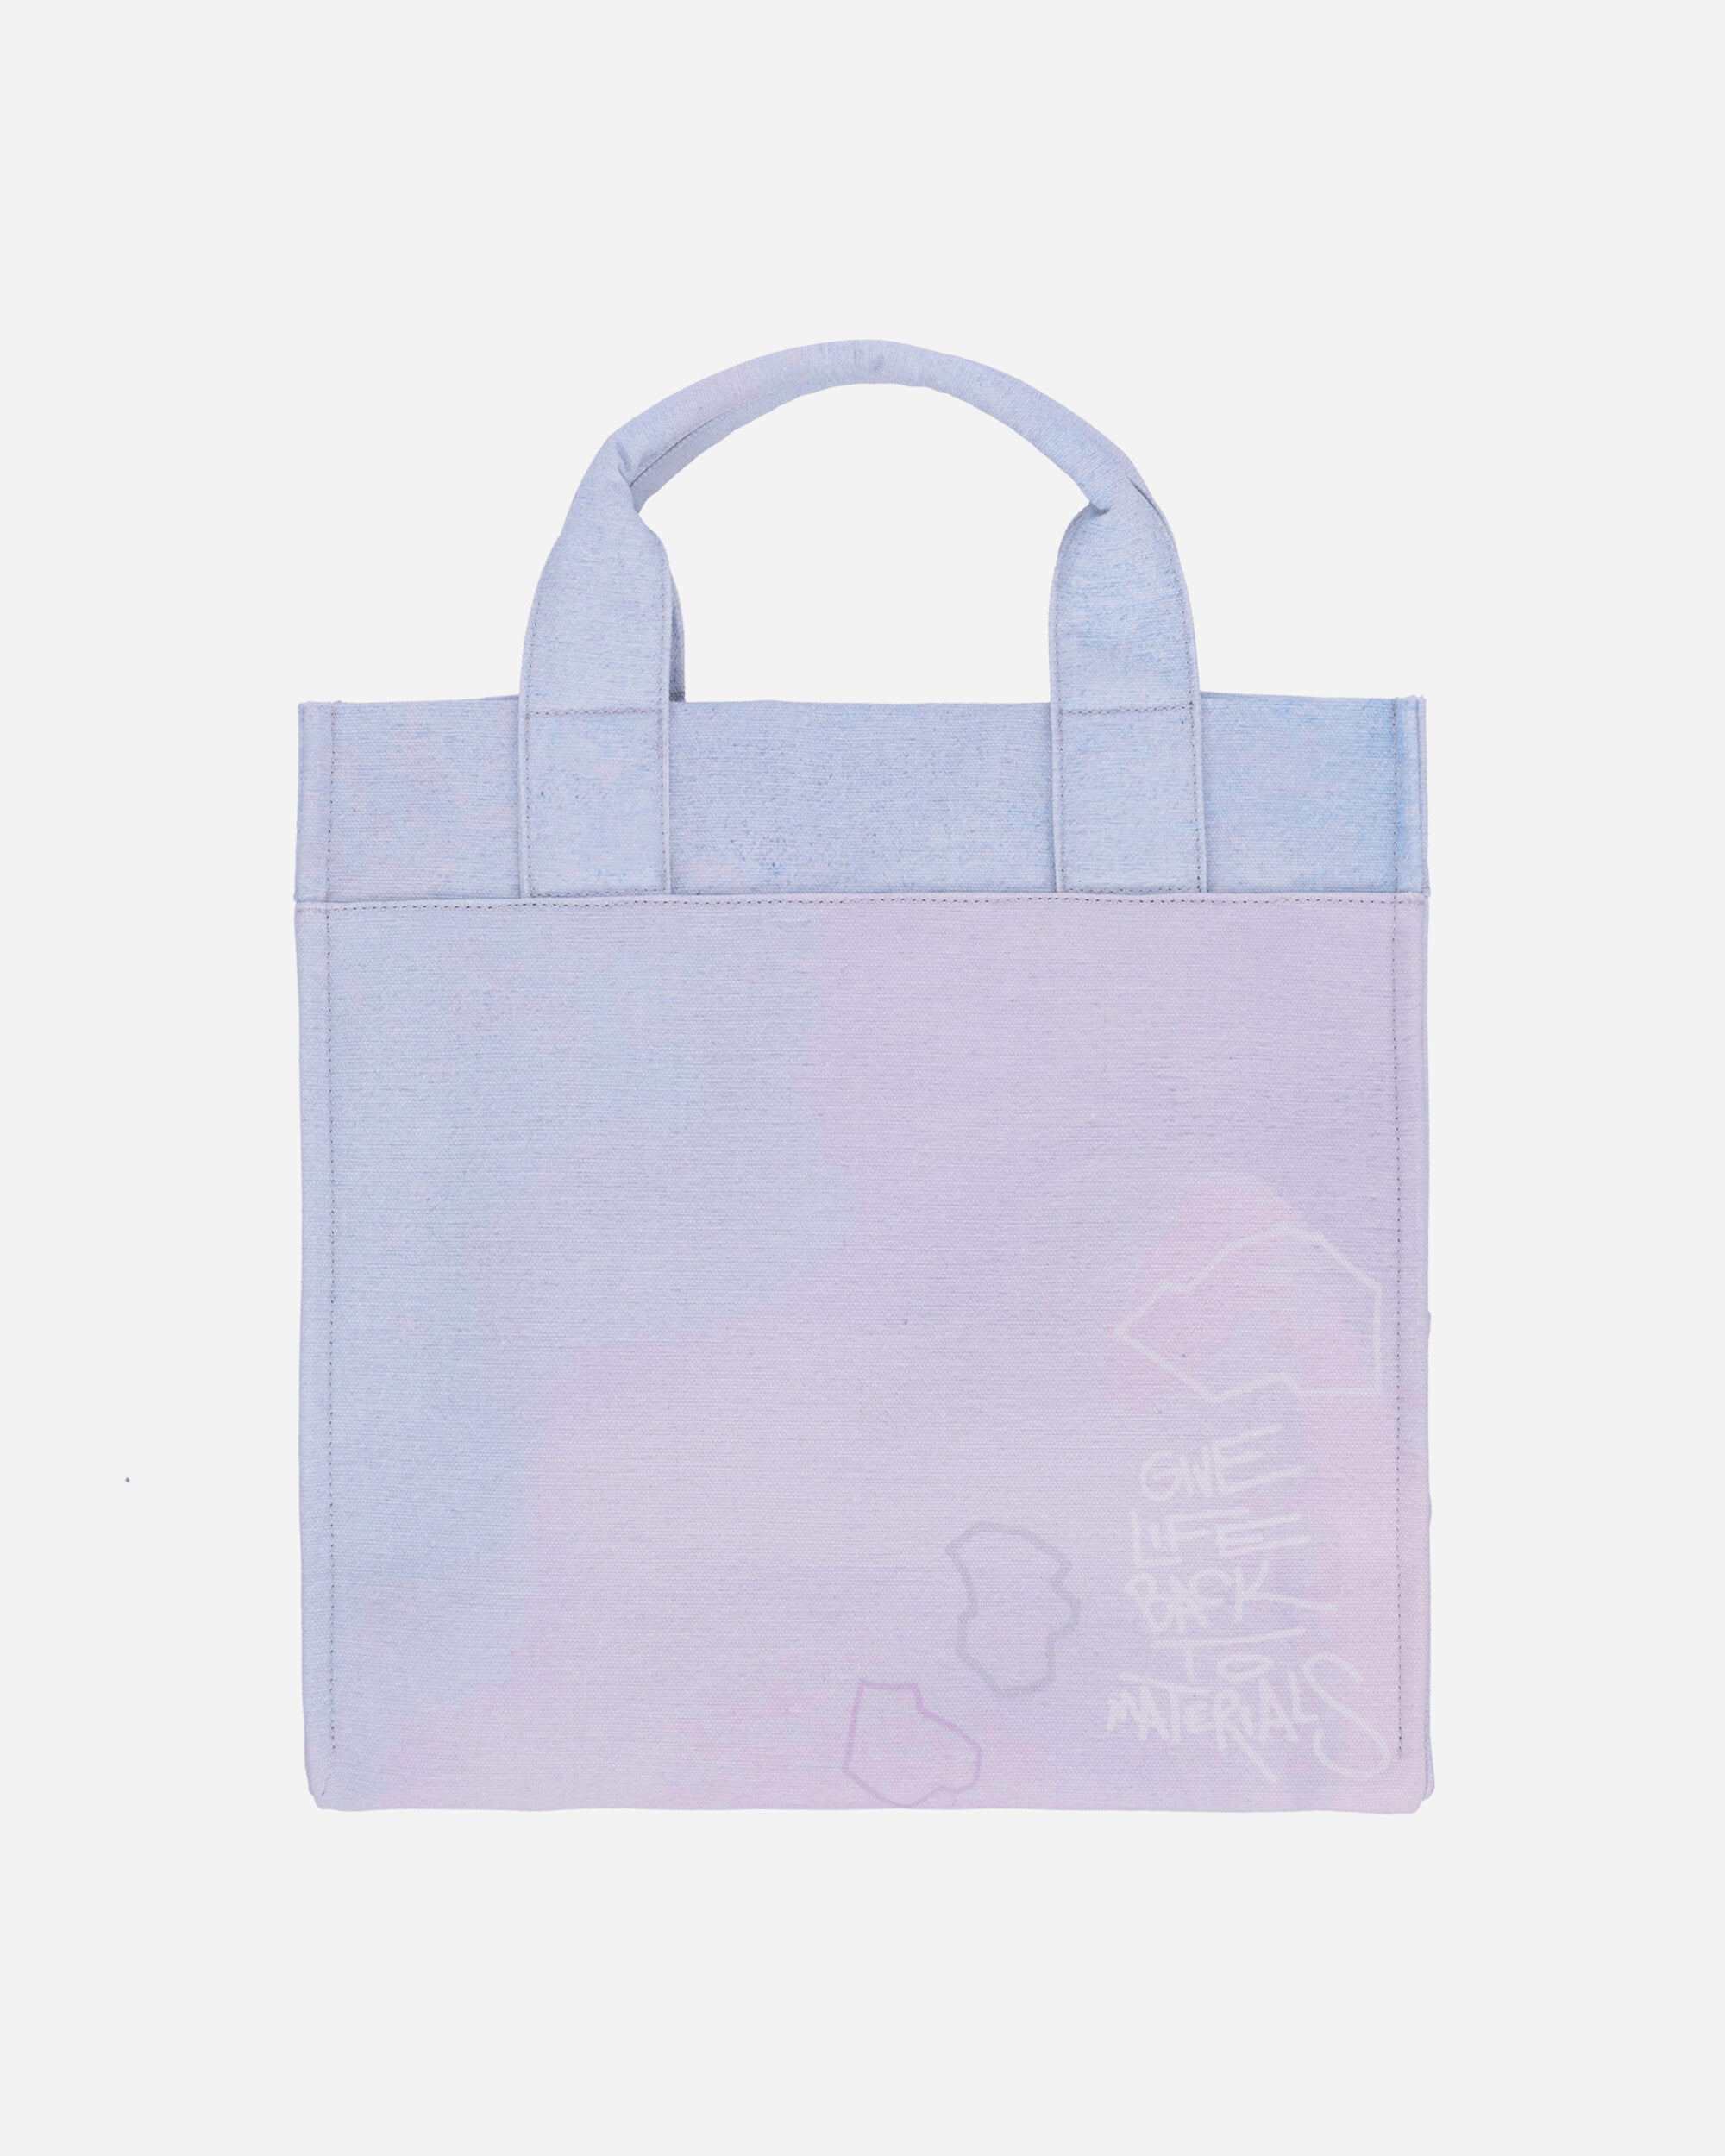 Objects IV Life Logo Tote Lilac Fade Bags and Backpacks Tote 002-703-23  LILFAD 